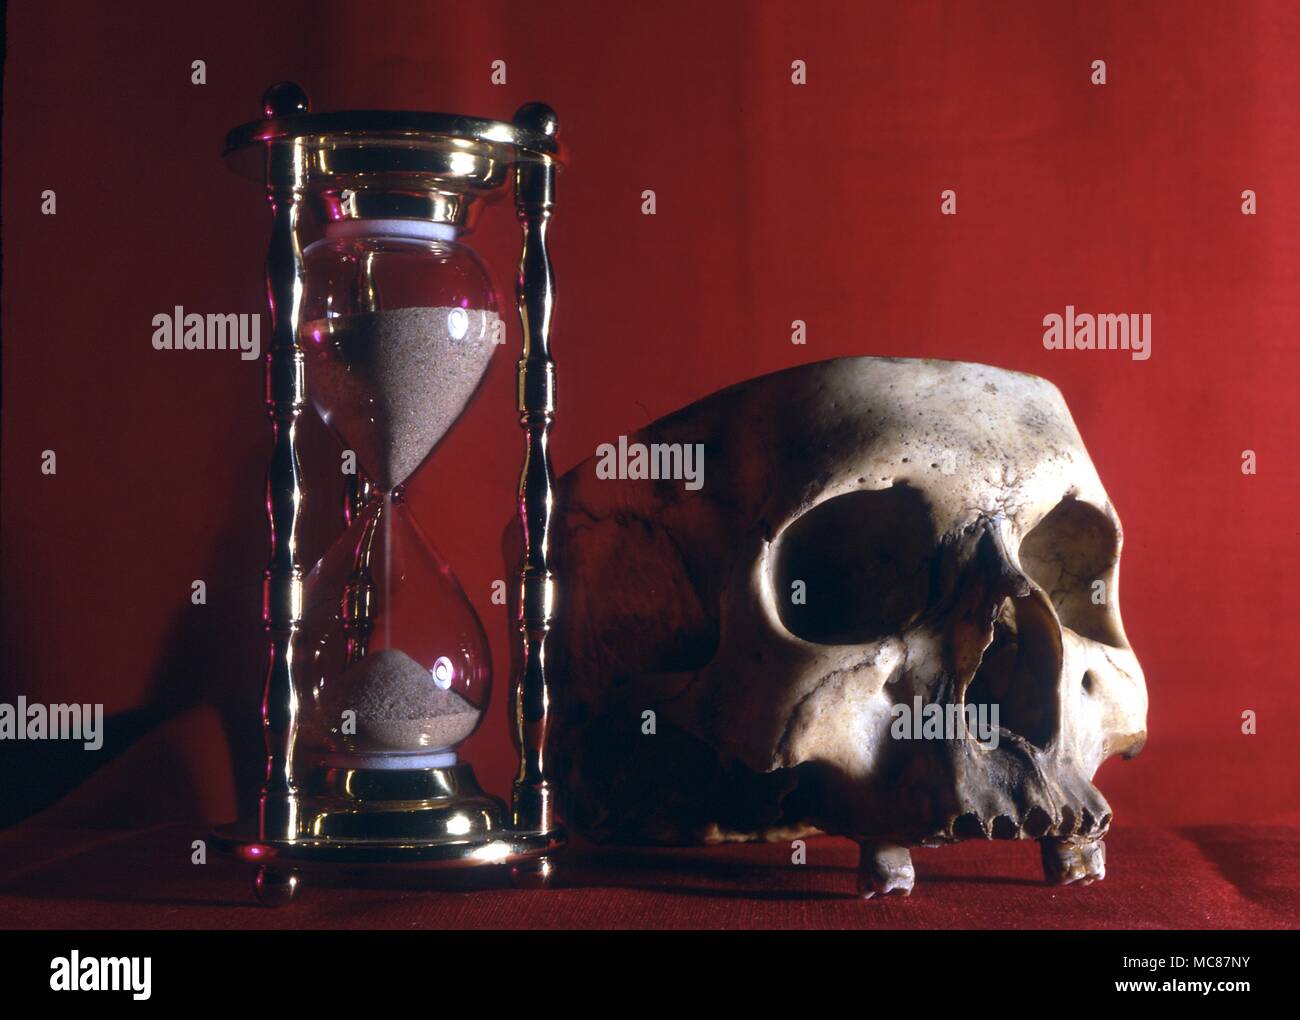 Horlogia Emblem of mortality the skull and the running sands clock egg timer the simplest form of horlogium Stock Photo